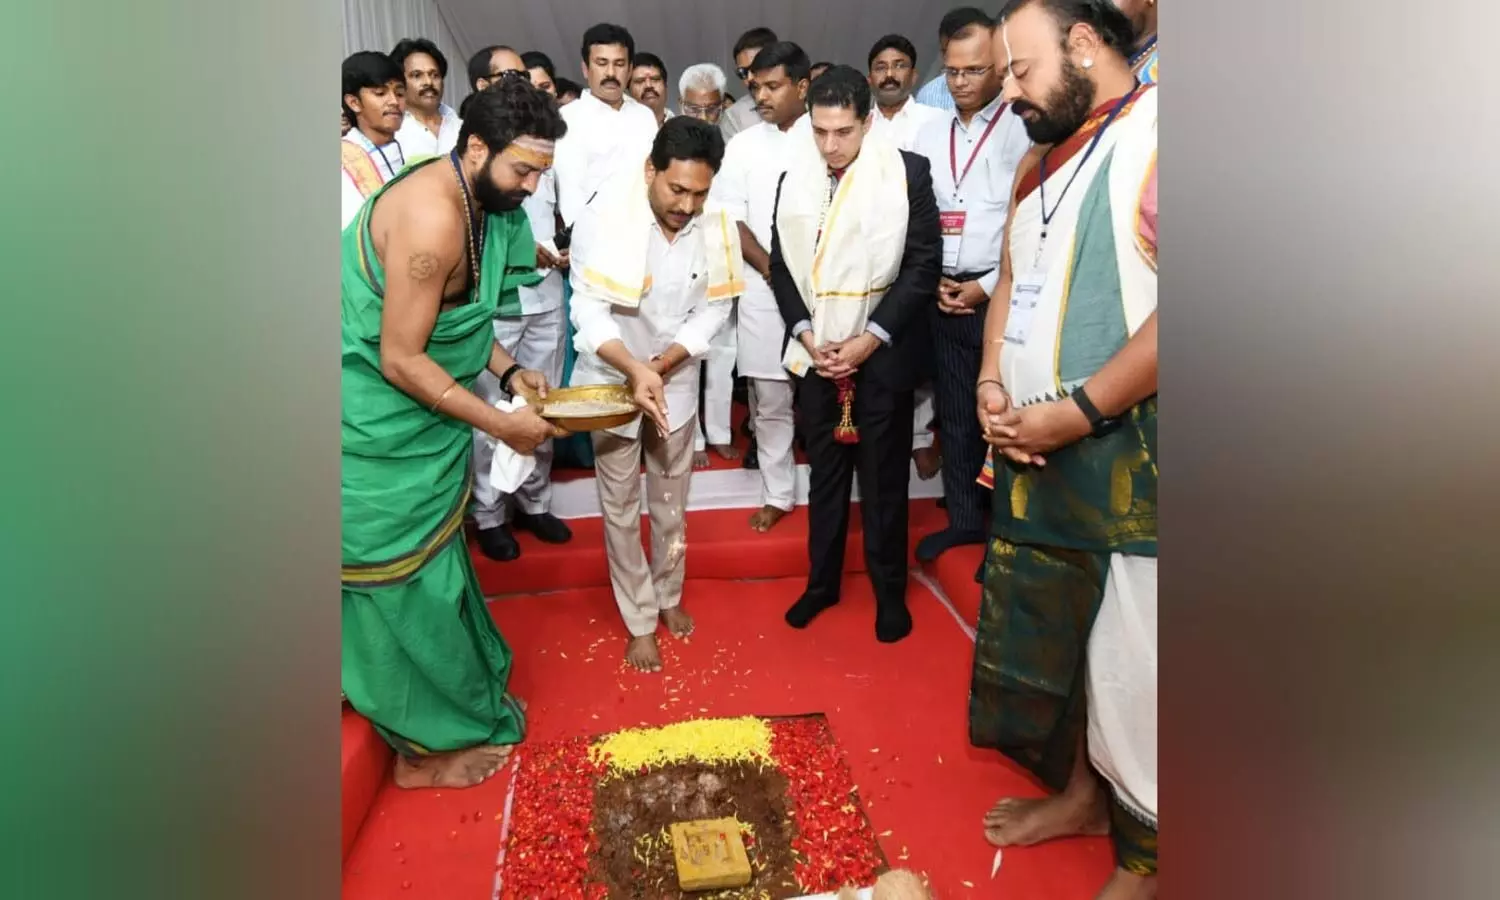 YS Jagan lays foundation stone for Inorbit Mall in Visakhapatnam, assures 8,000 jobs